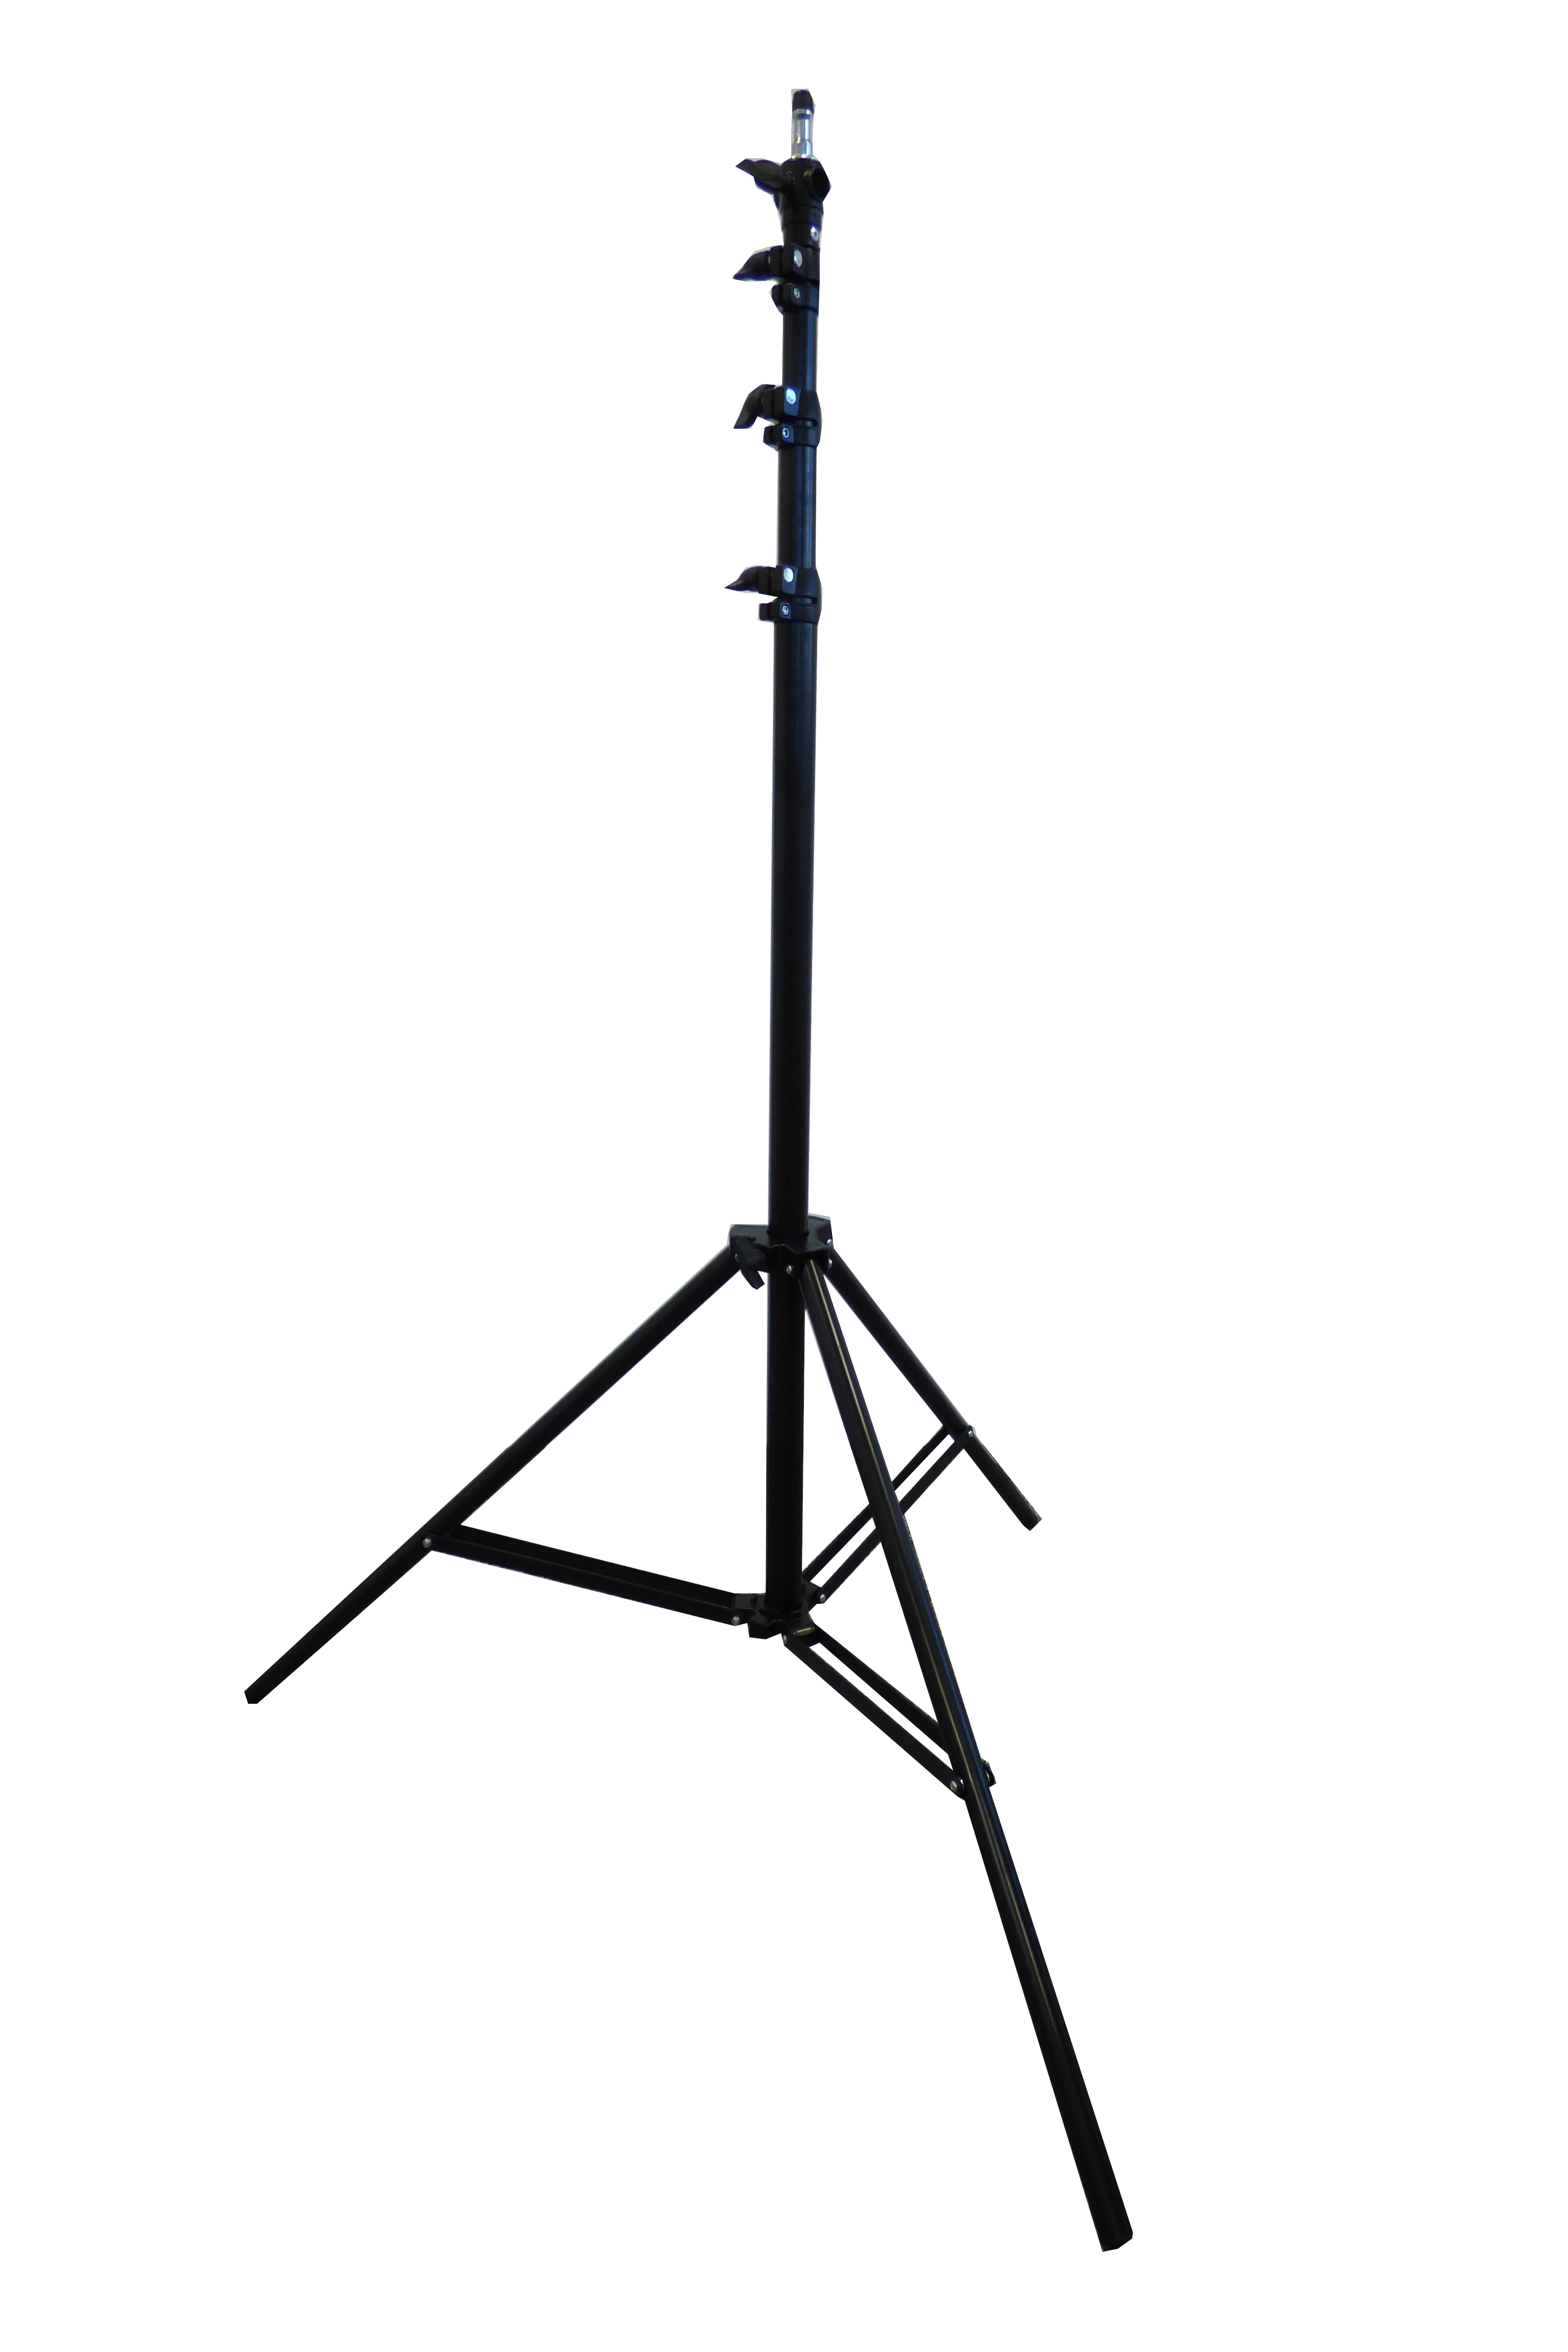 Air spring tripod 120 to 320 cm height